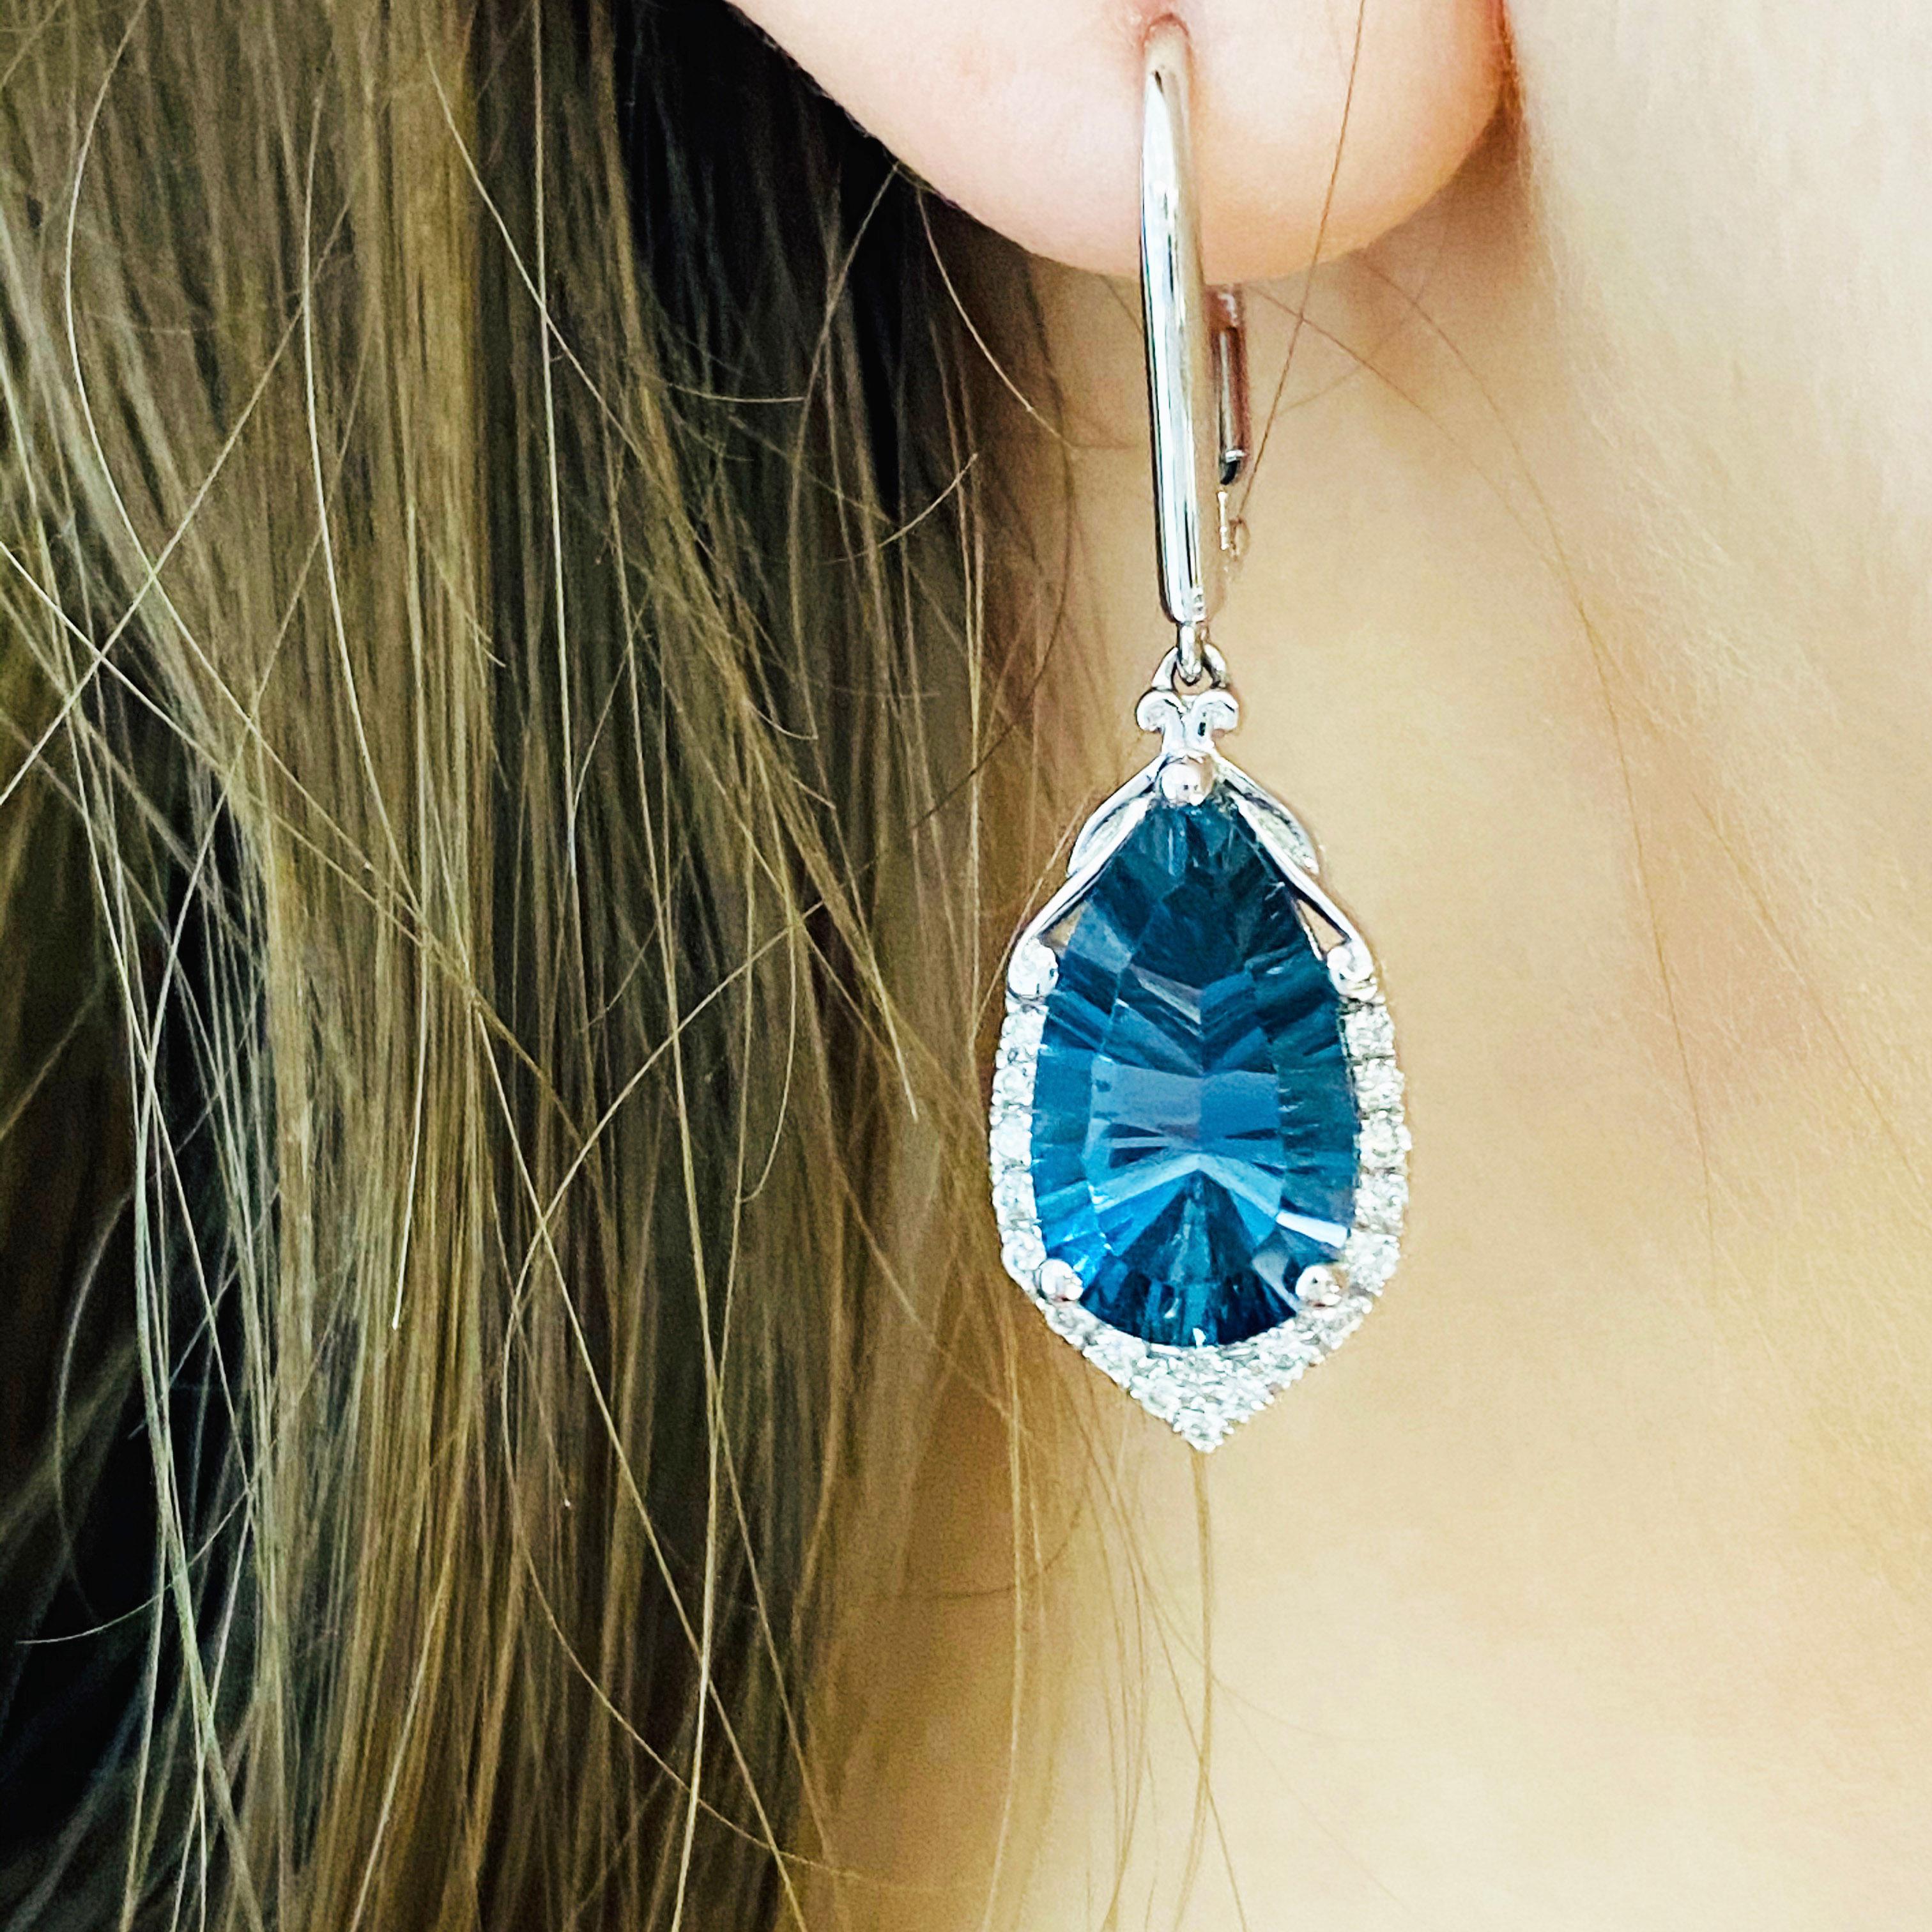 You won't believe how much these earrings sparkle! These gorgeous 14k white gold vibrant royal blue topaz dangle earrings dripping with 36 excellent white diamonds are absolutely stunning and sure to make anyone's heart skip a beat. The vibrant